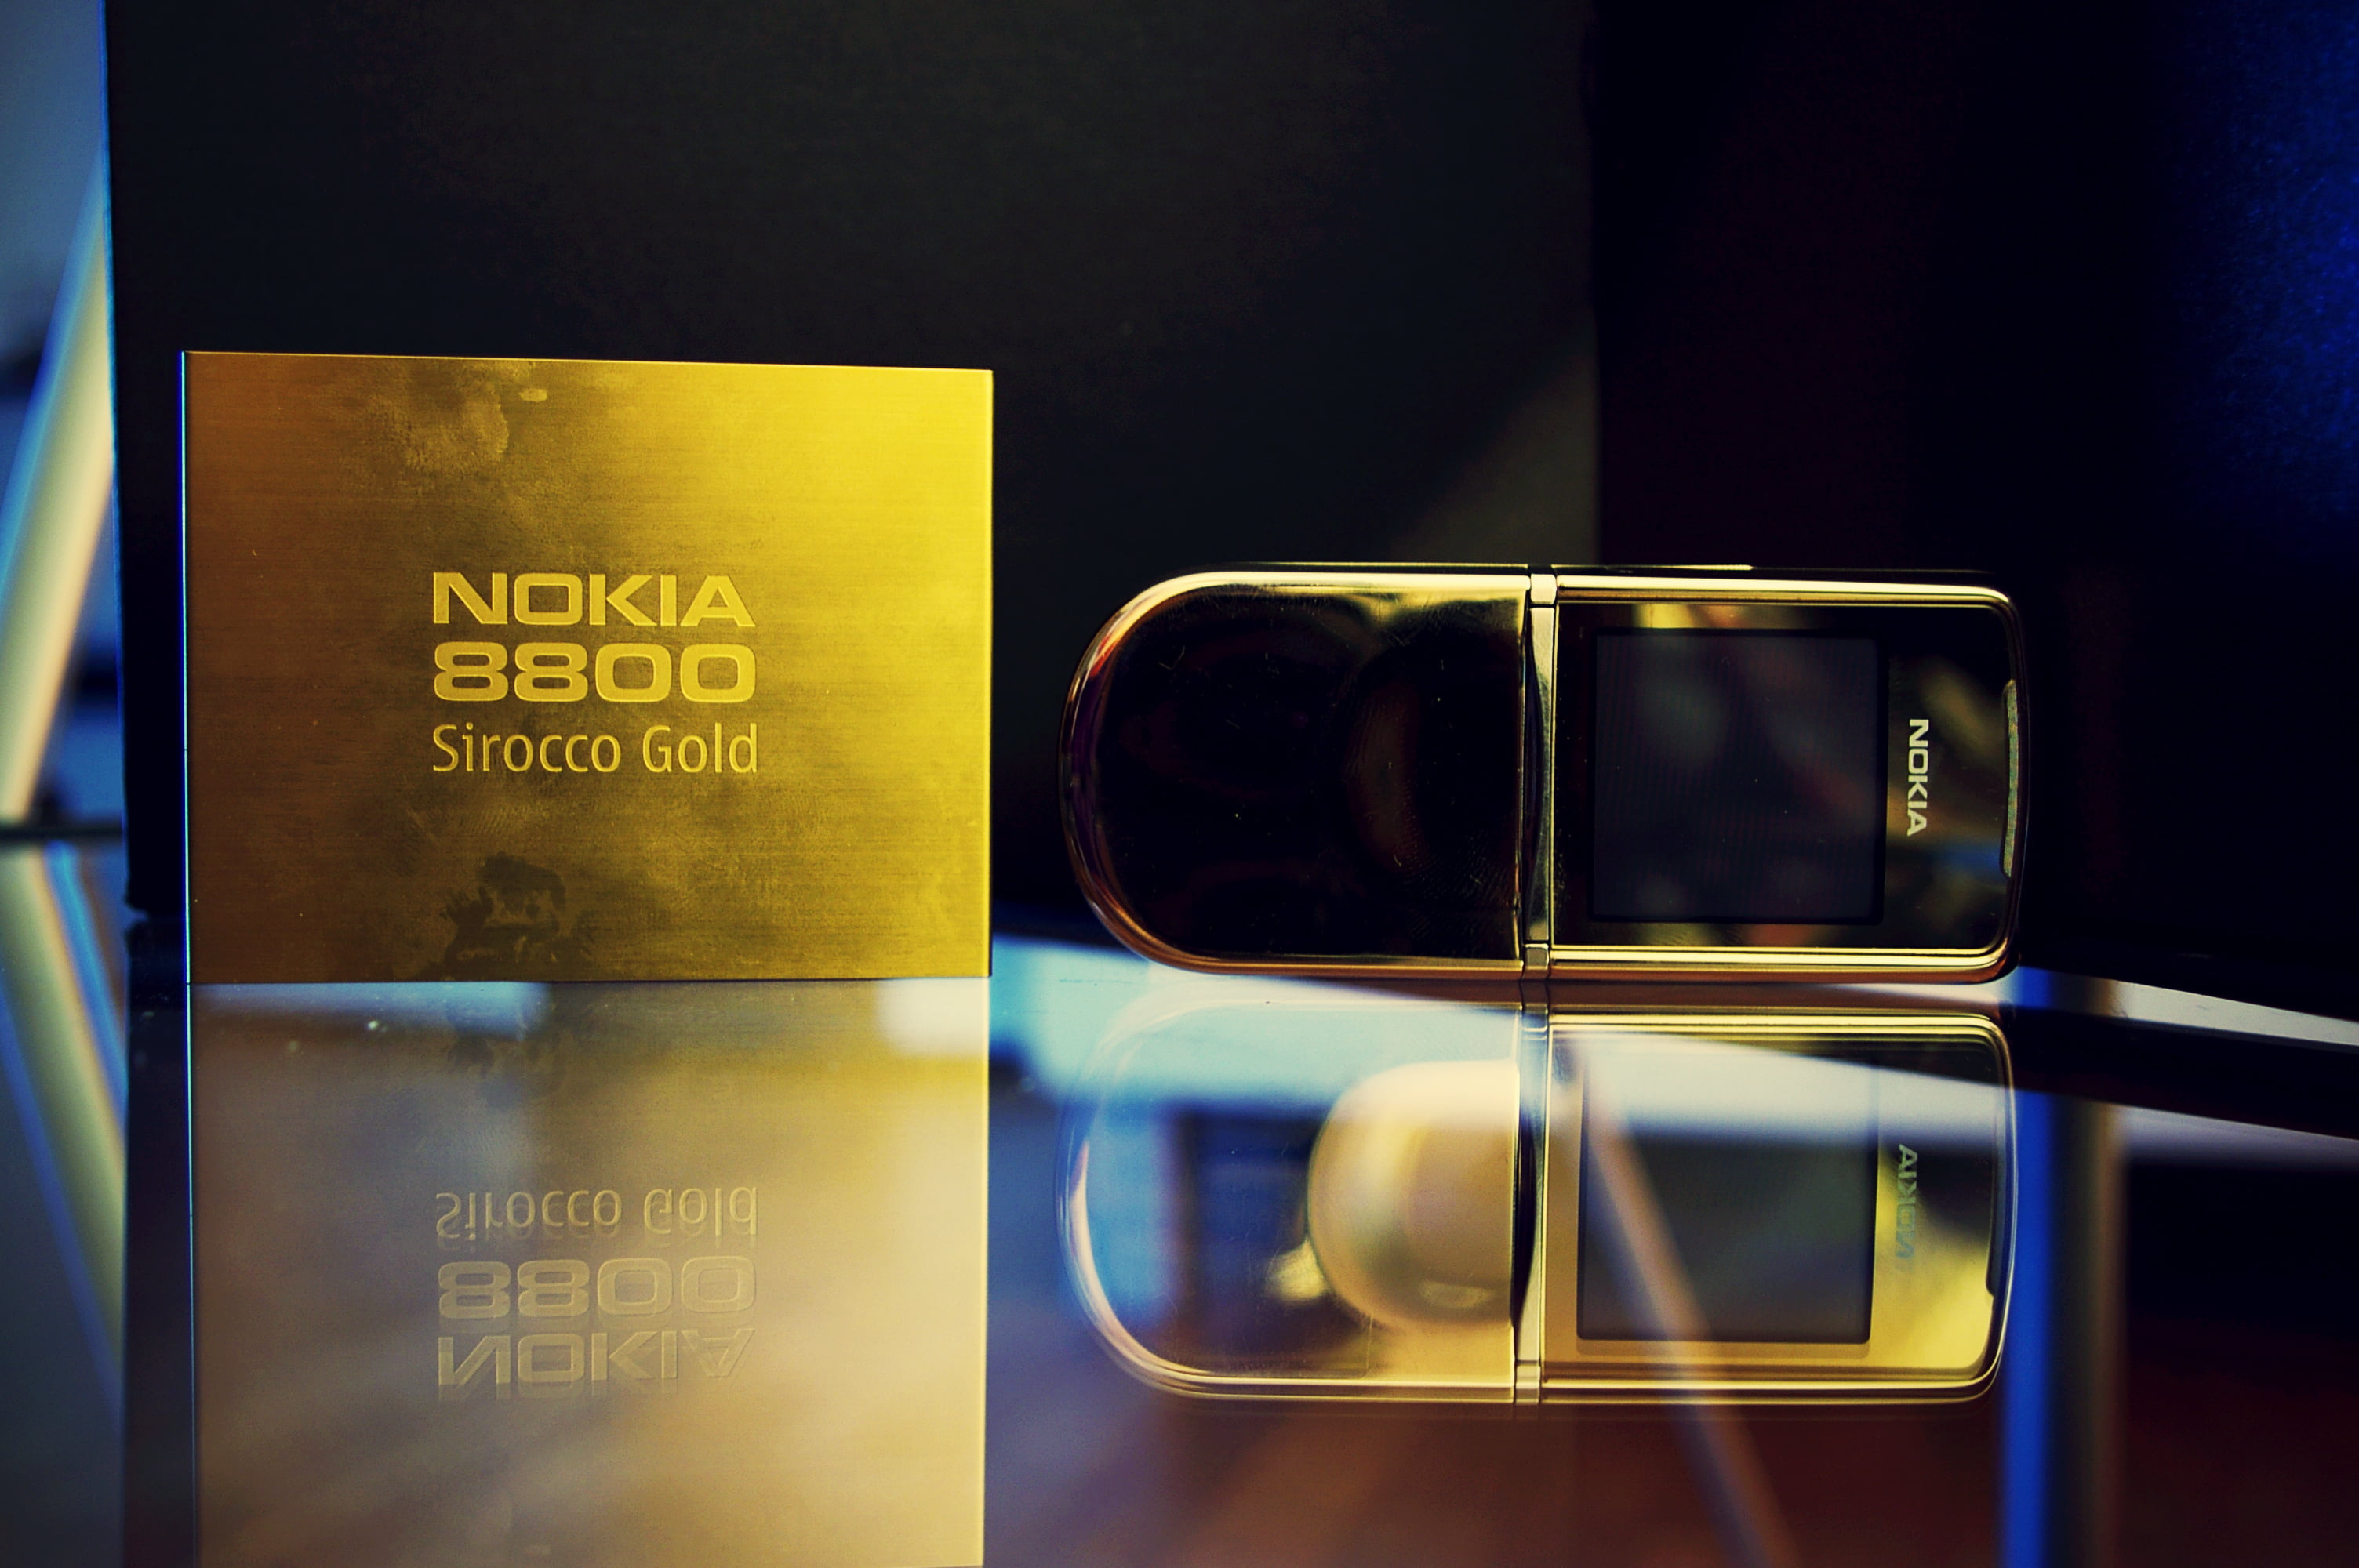 phone, classic, Edition, Nokia 8800, slider, Sirocco Gold, text